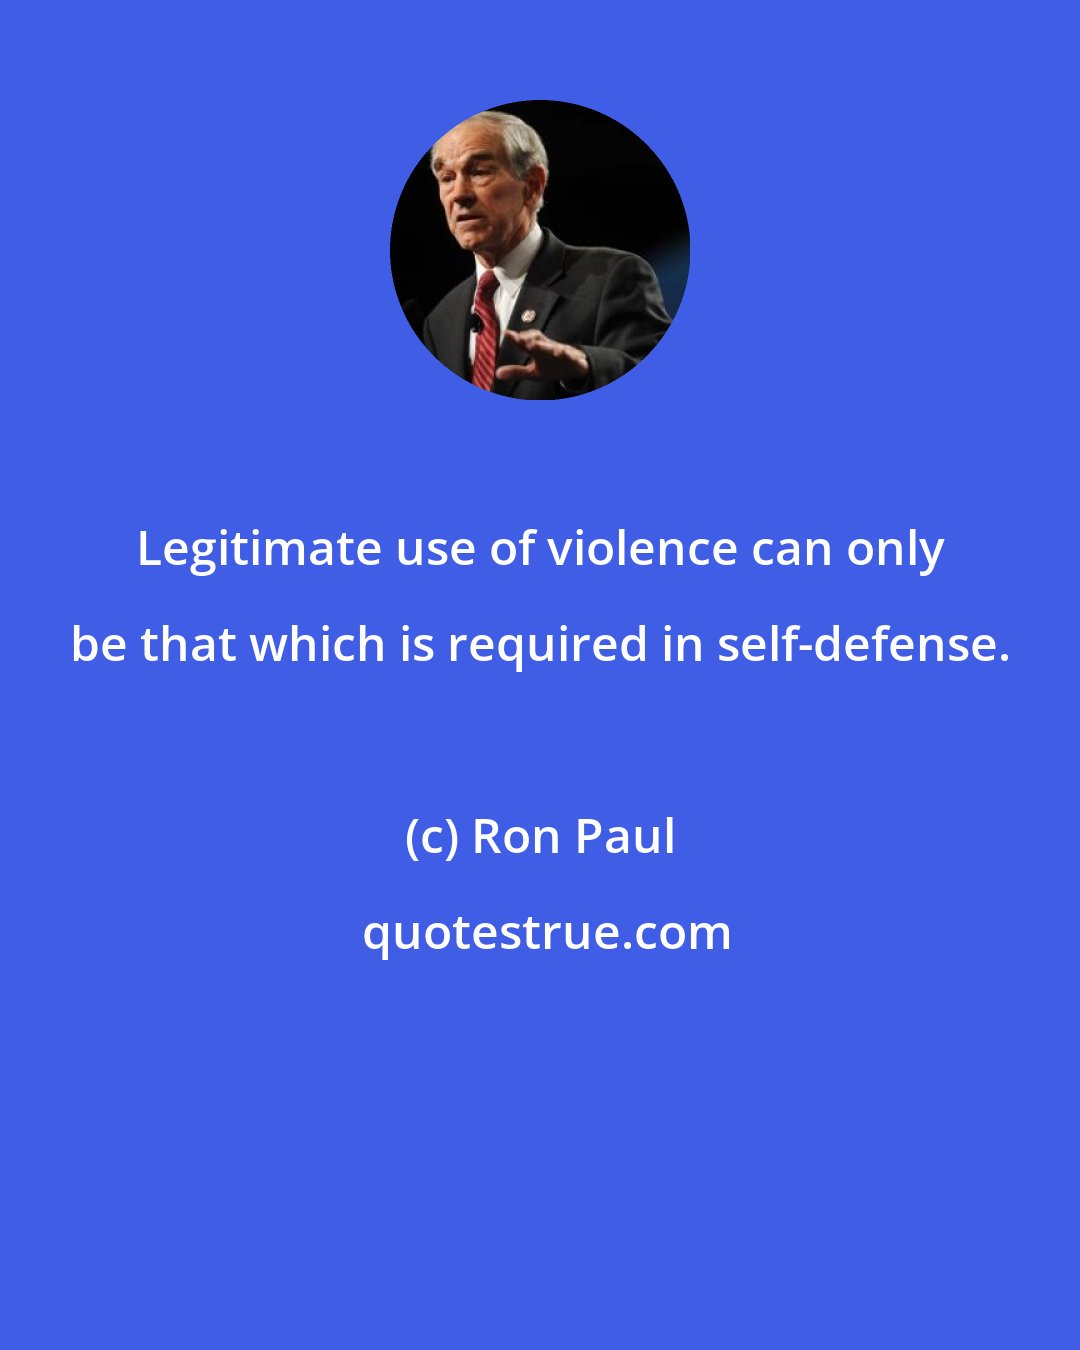 Ron Paul: Legitimate use of violence can only be that which is required in self-defense.